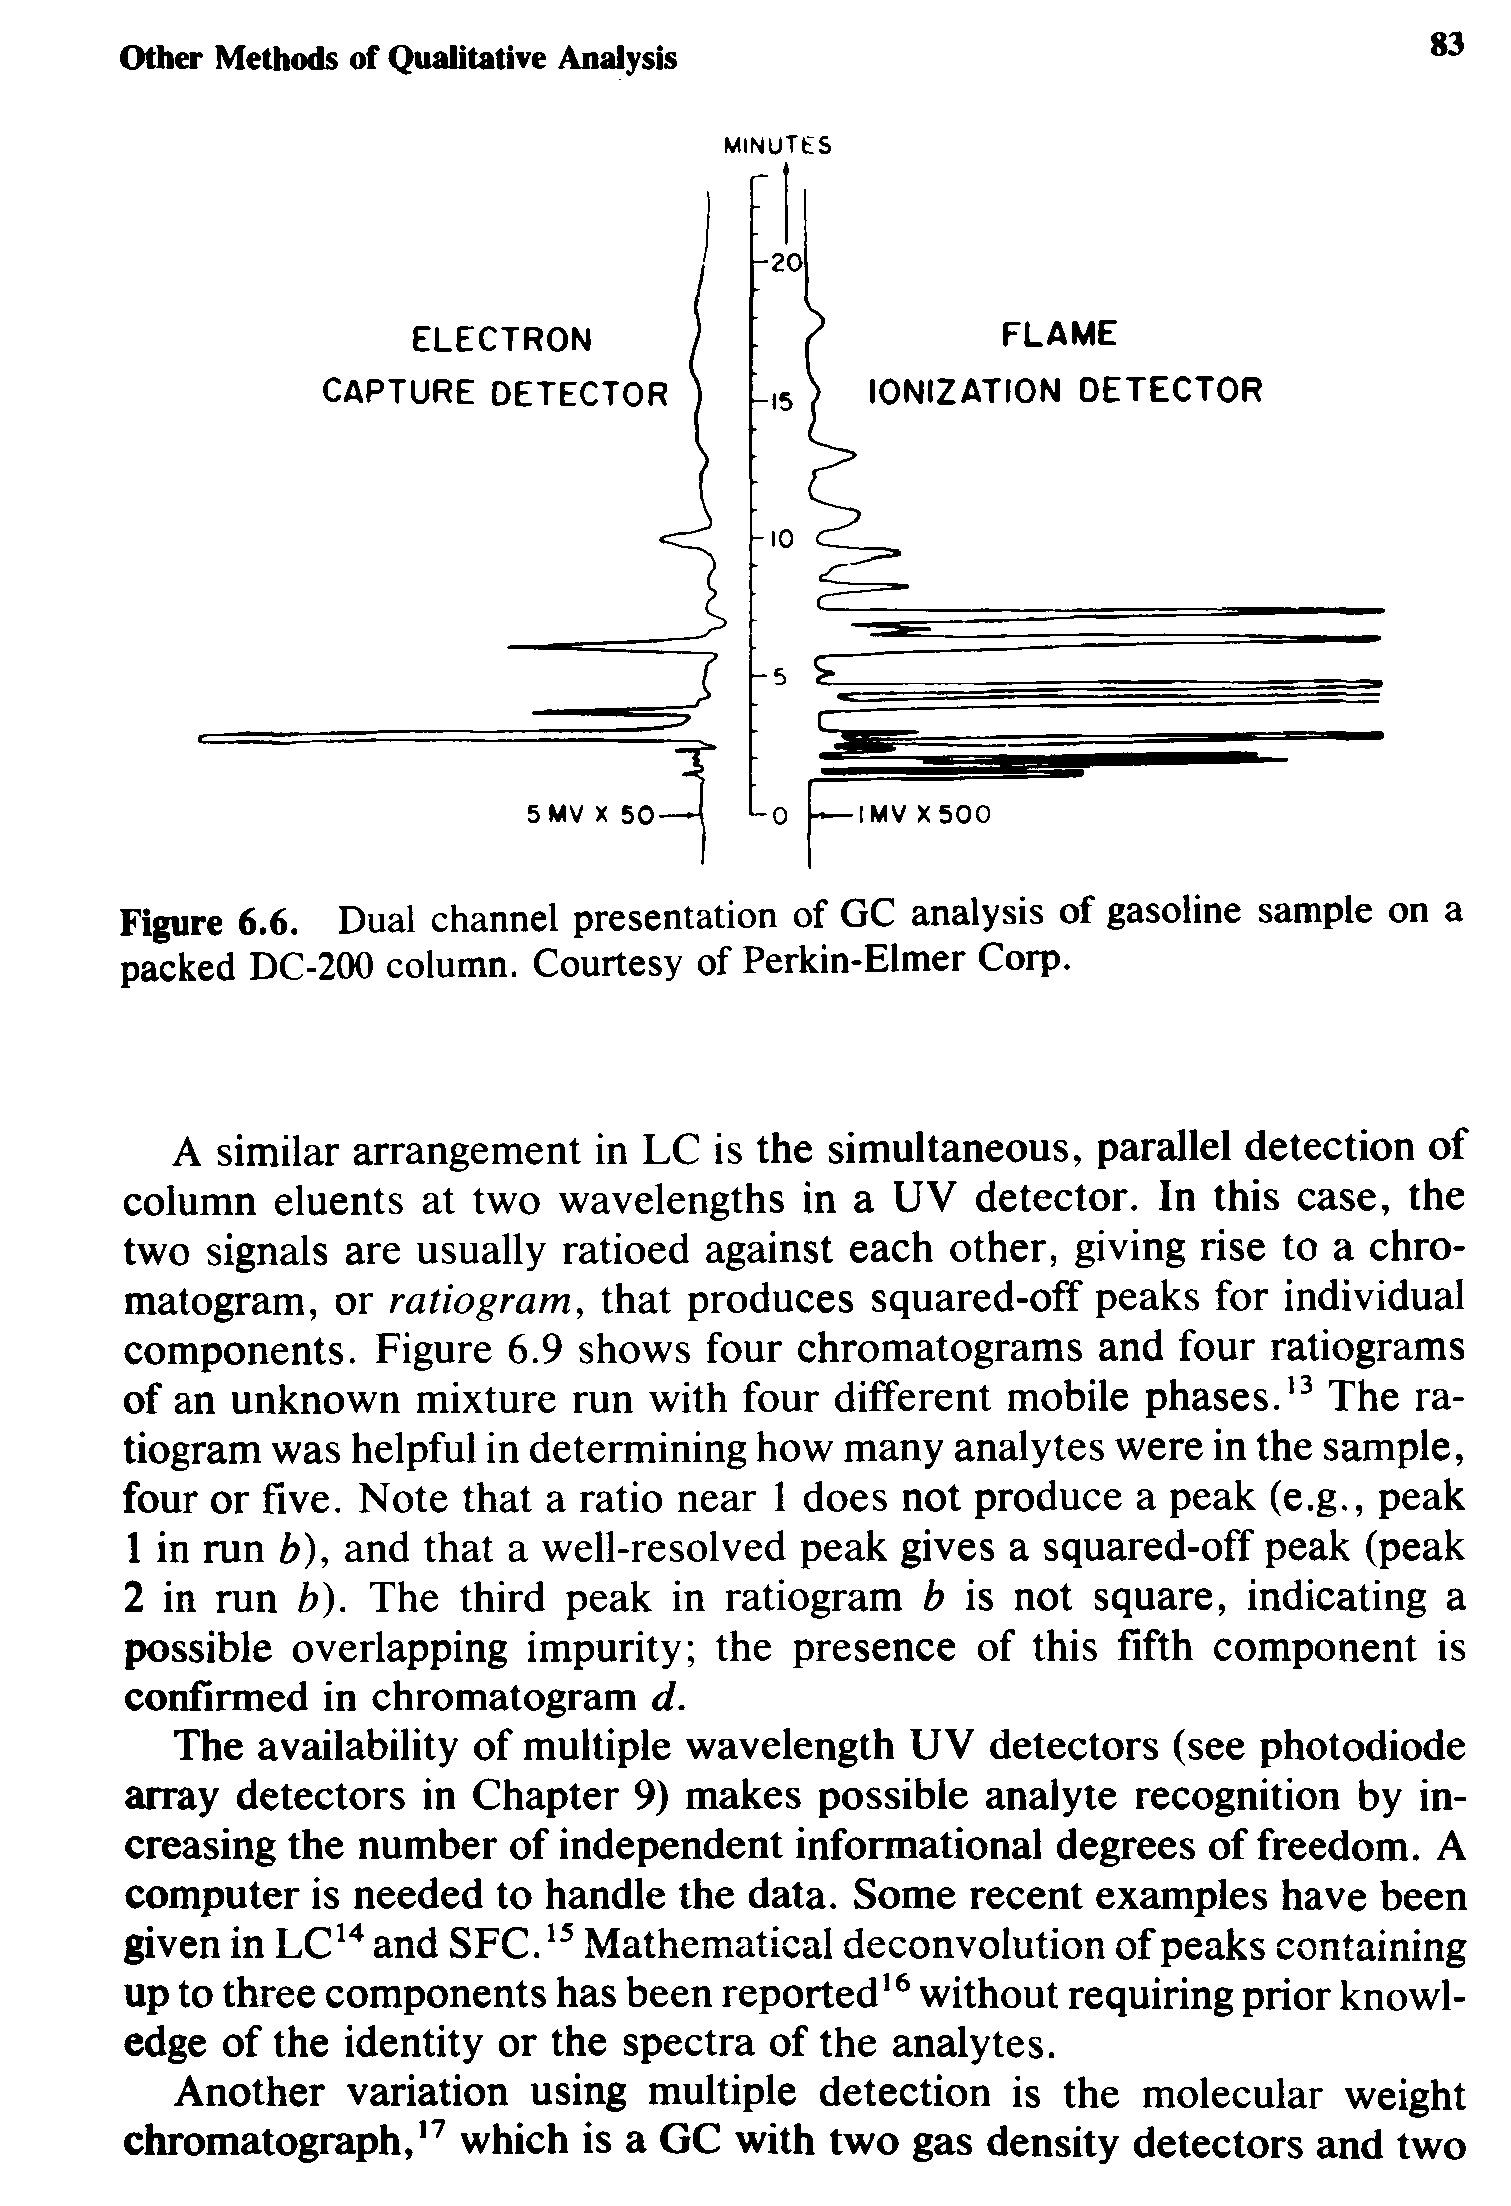 Figure 6.6. Dual channel presentation of GC analysis of gasoline sample on a packed DC-200 column. Courtesy of Perkin-Elmer Corp.